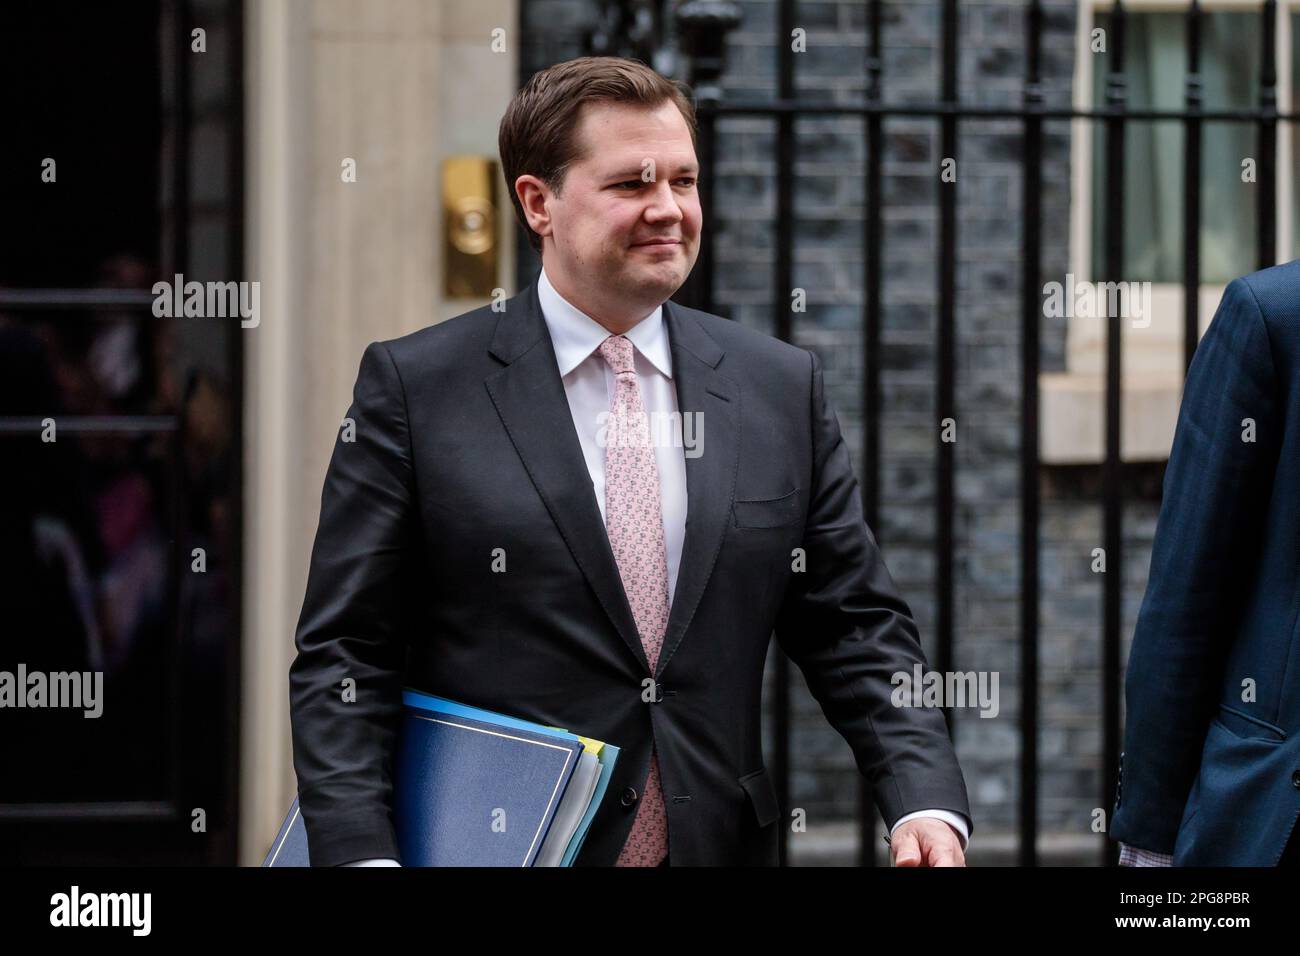 Downing Street, London, UK. 21st March 2023.  Robert Jenrick MP, Minister of State (Minister for Immigration) in the Home Office, attends the weekly Cabinet Meeting at 10 Downing Street. Photo by Amanda Rose/Alamy Live News Stock Photo